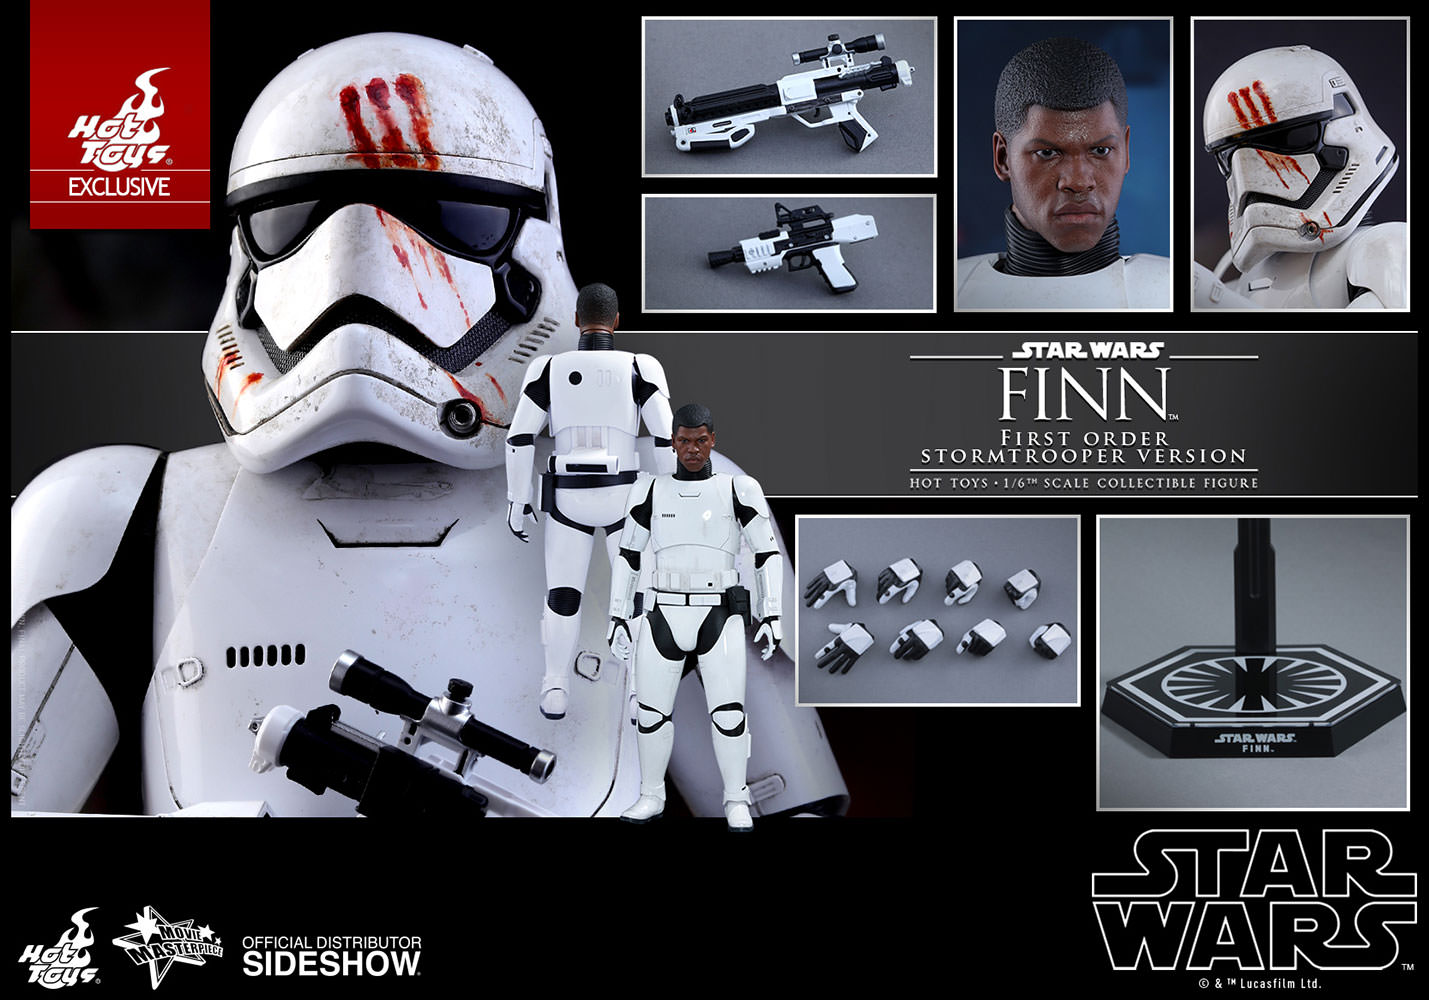 https://www.sideshowtoy.com/assets/products/902711-finn-first-order-stormtrooper-version/lg/star-wars-episode-7-finn-first-order-stormtrooper-version-sixth-scale-hot-toys-902711-15.jpg